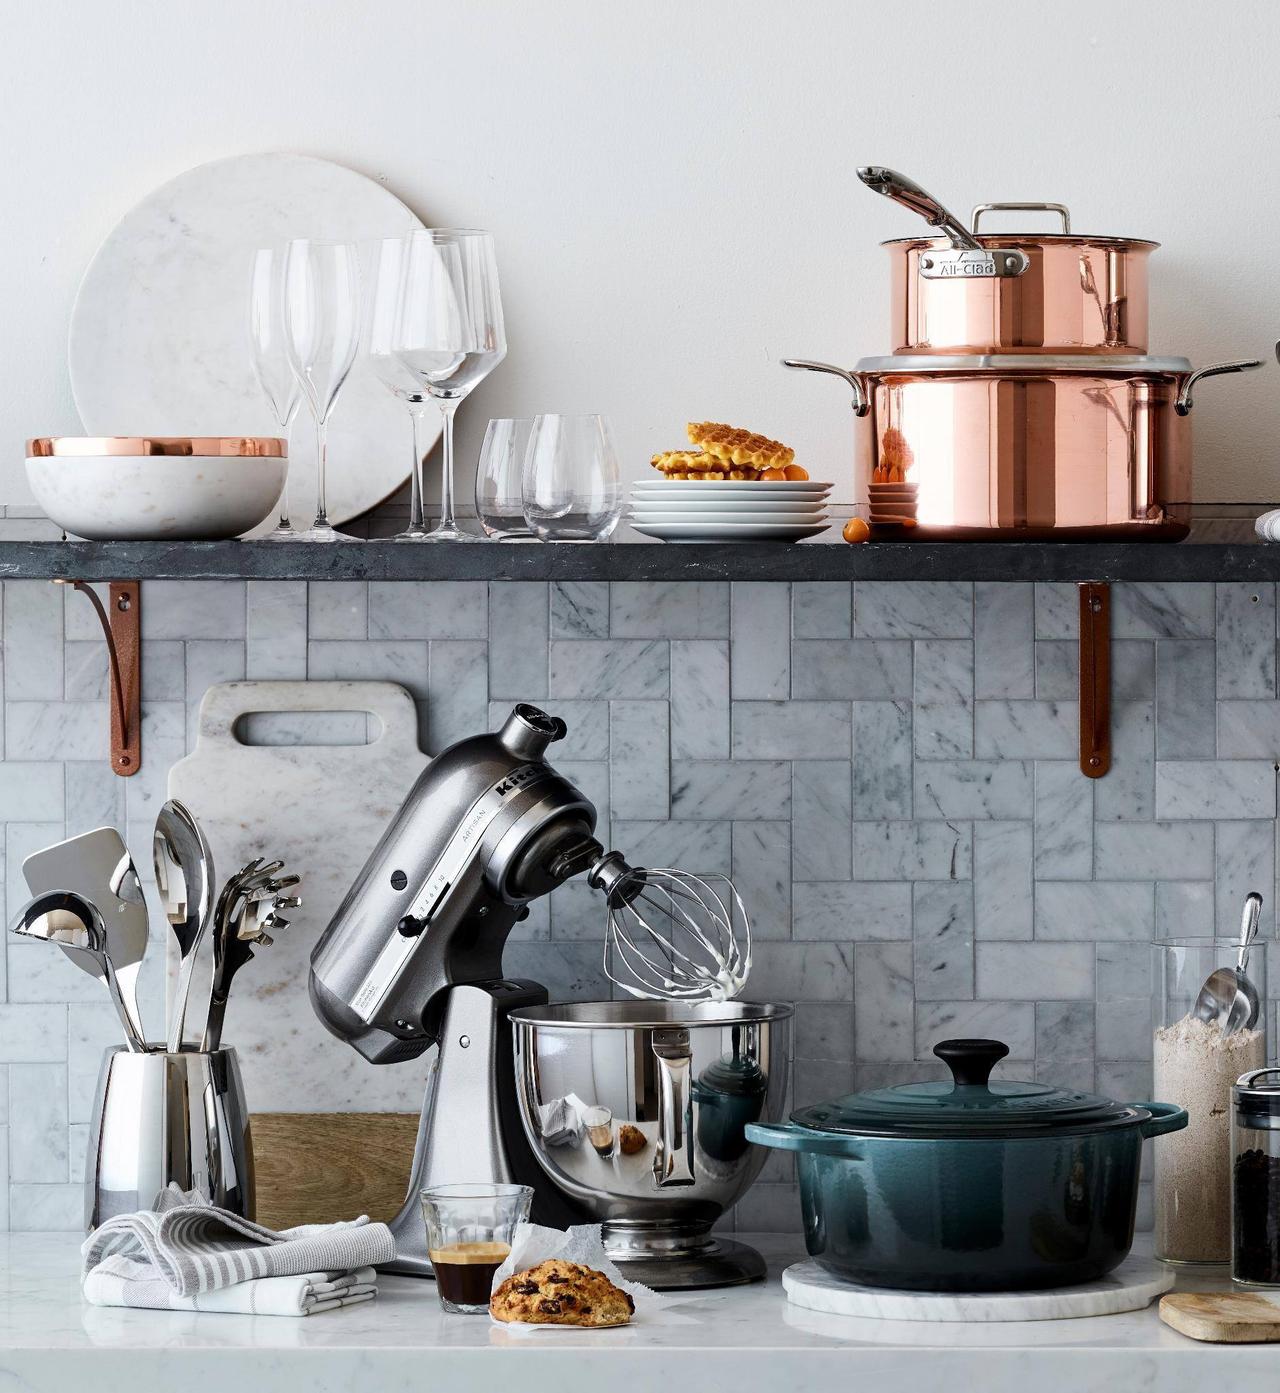 20 Thoughtful Appliances for Wedding Gifts in 2020 | Little Home Appliance